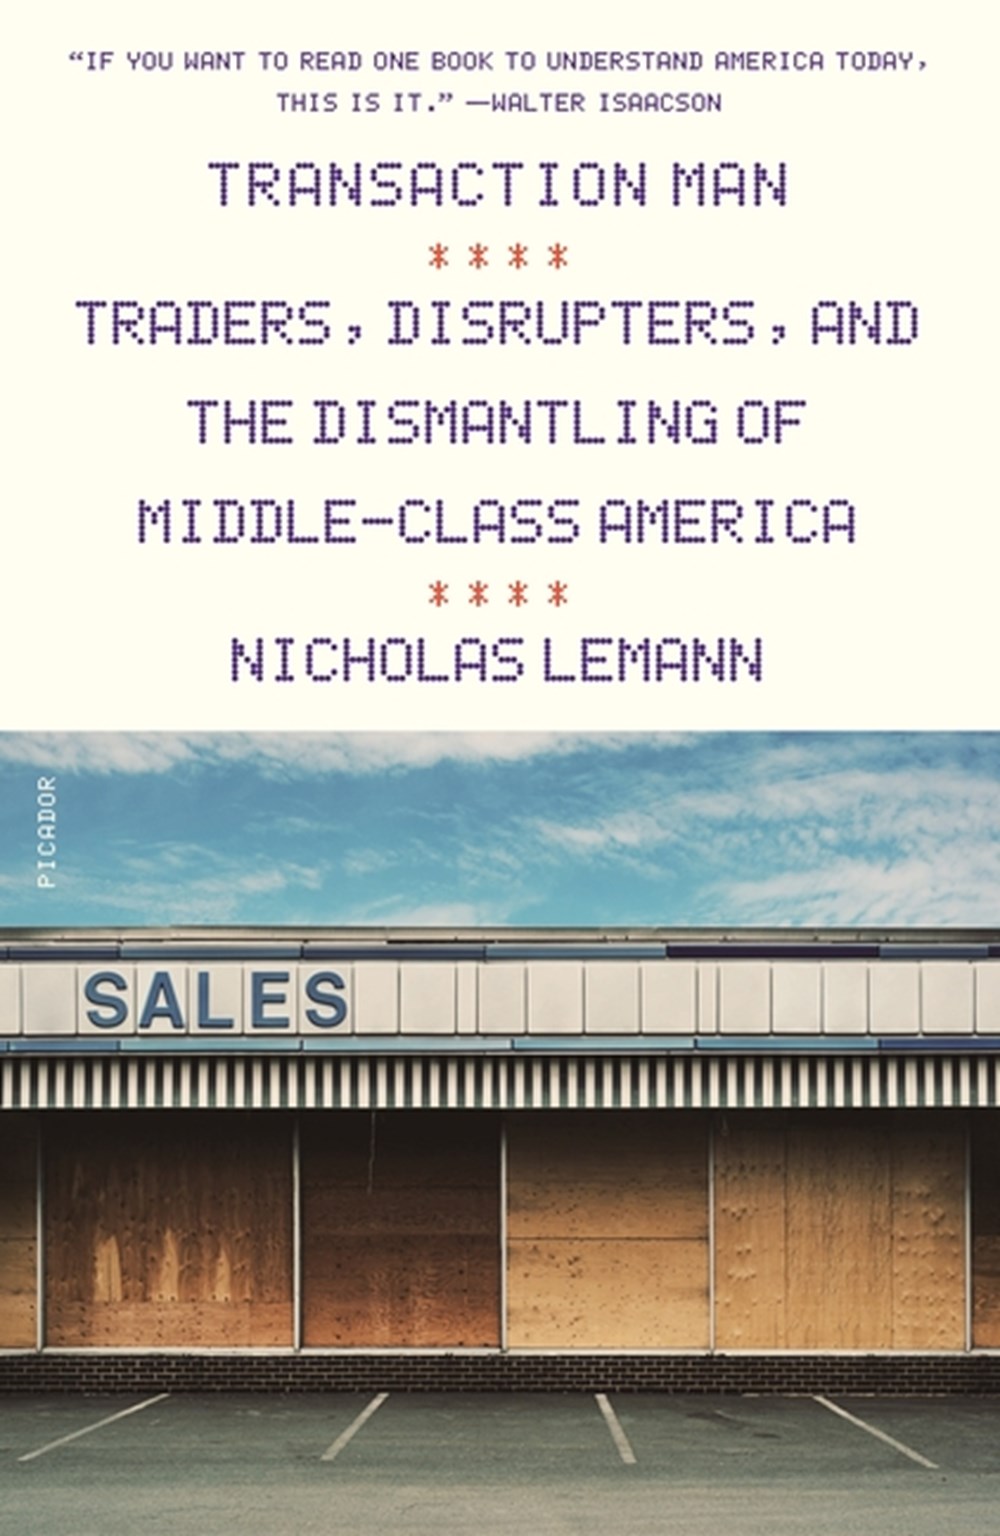 Transaction Man Traders, Disrupters, and the Dismantling of Middle-Class America